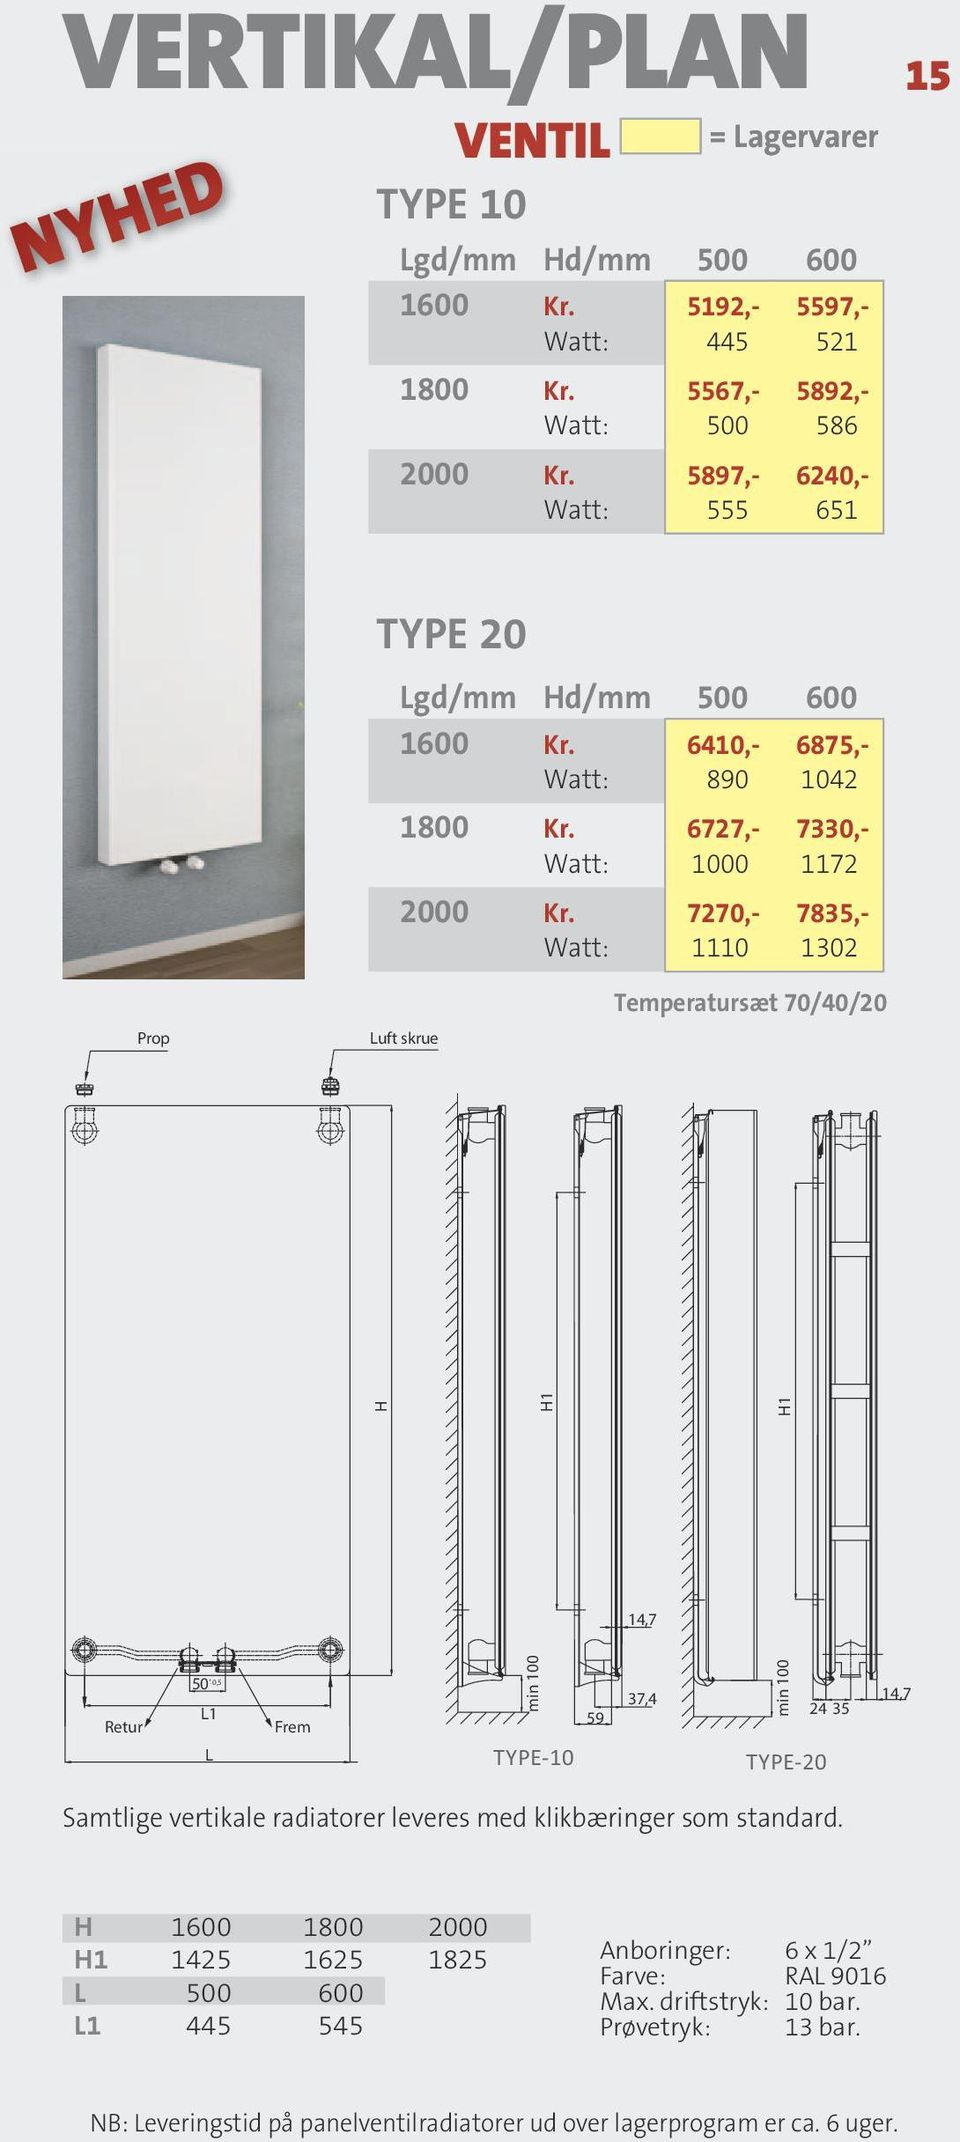 limited space. They can also be mounted in Schools, Hospitals and Nurseries in safe and comfort.copa Flat Surface Vertical Panel Radiators are only produced in 4 connections.